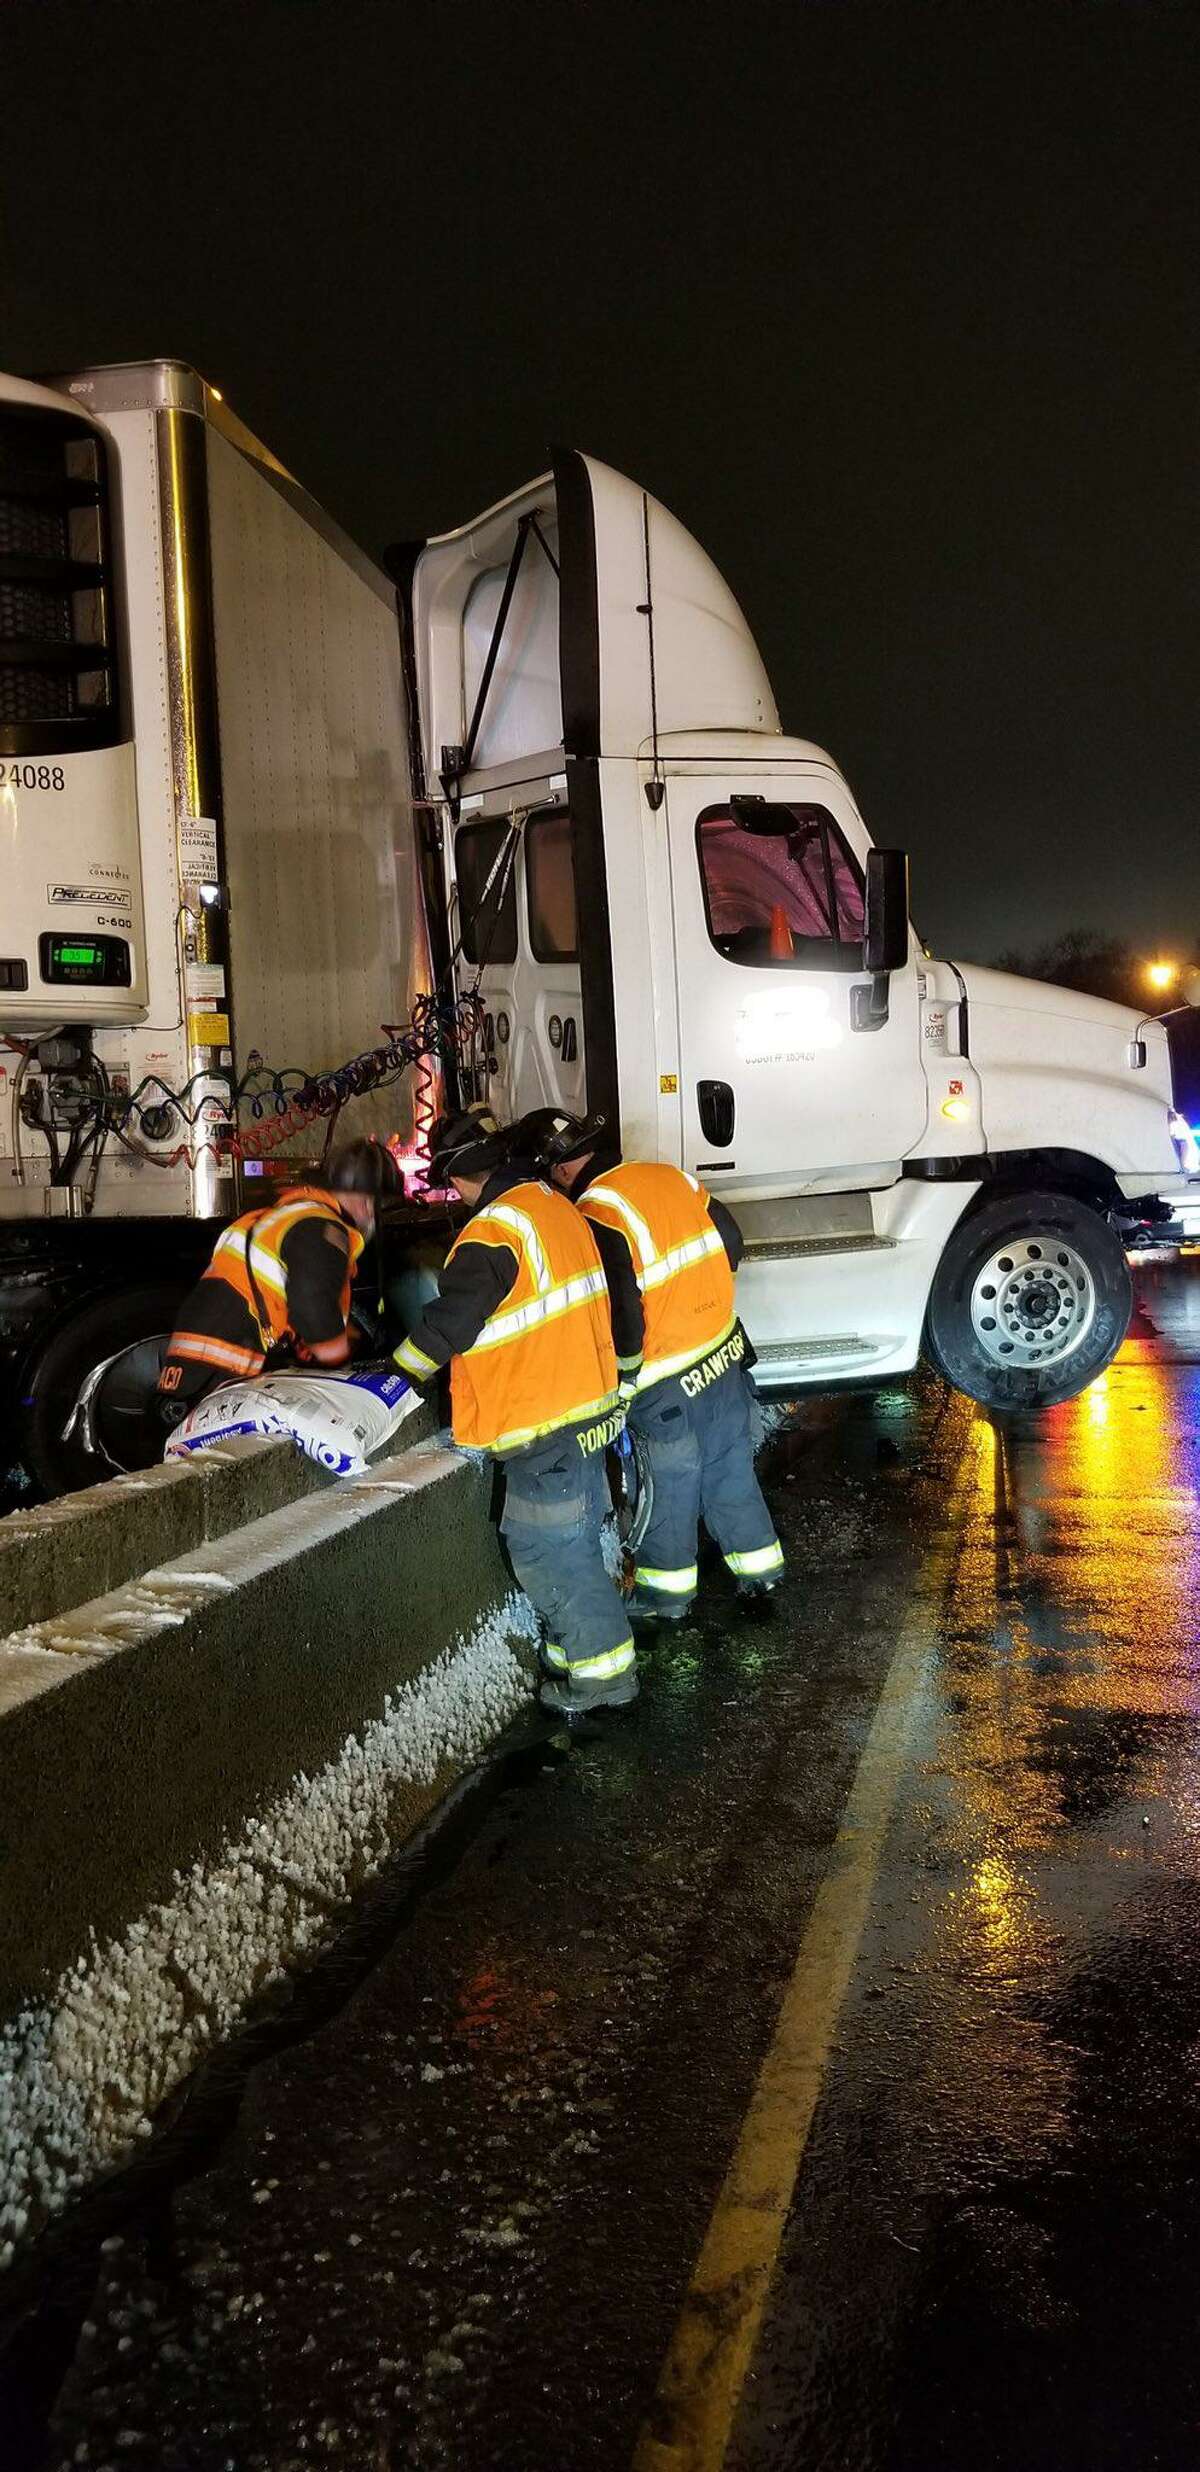 Fire crews from Westport at the scene of a jackknifed tractor-trailer on I-95 in Norwalk, Conn., on Friday, Dec. 24, 2021.